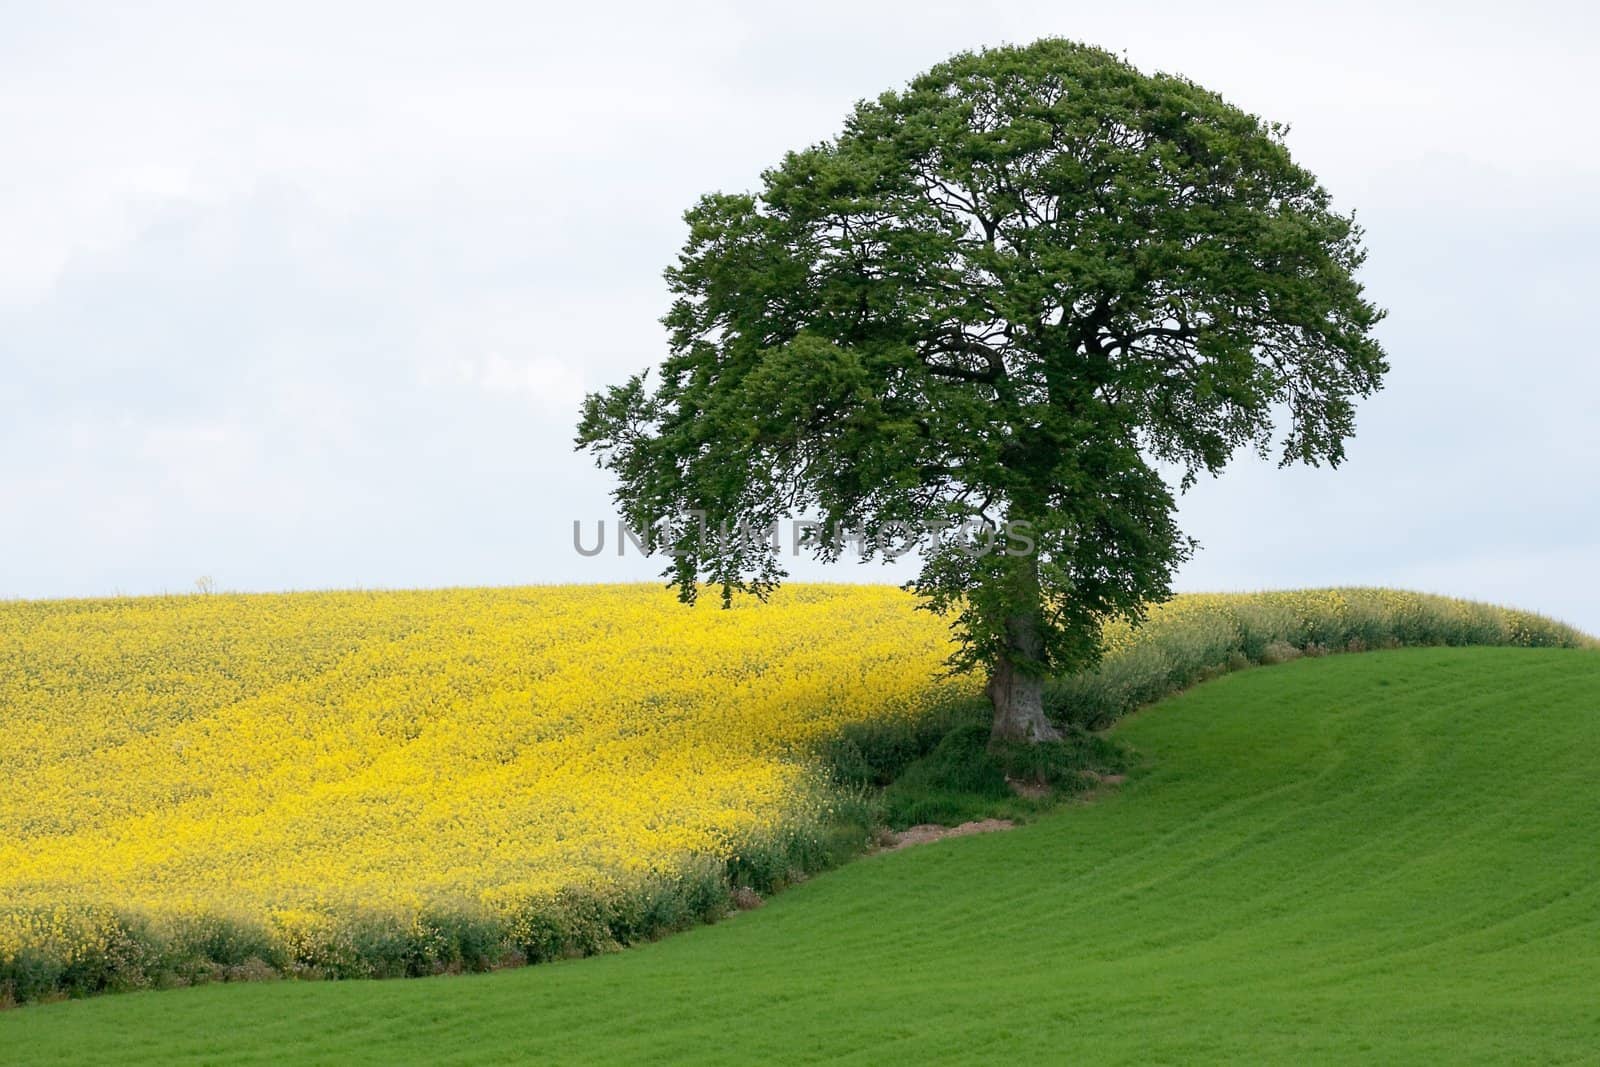 Tree in a landscape of green and yellow field of rape seed flowers